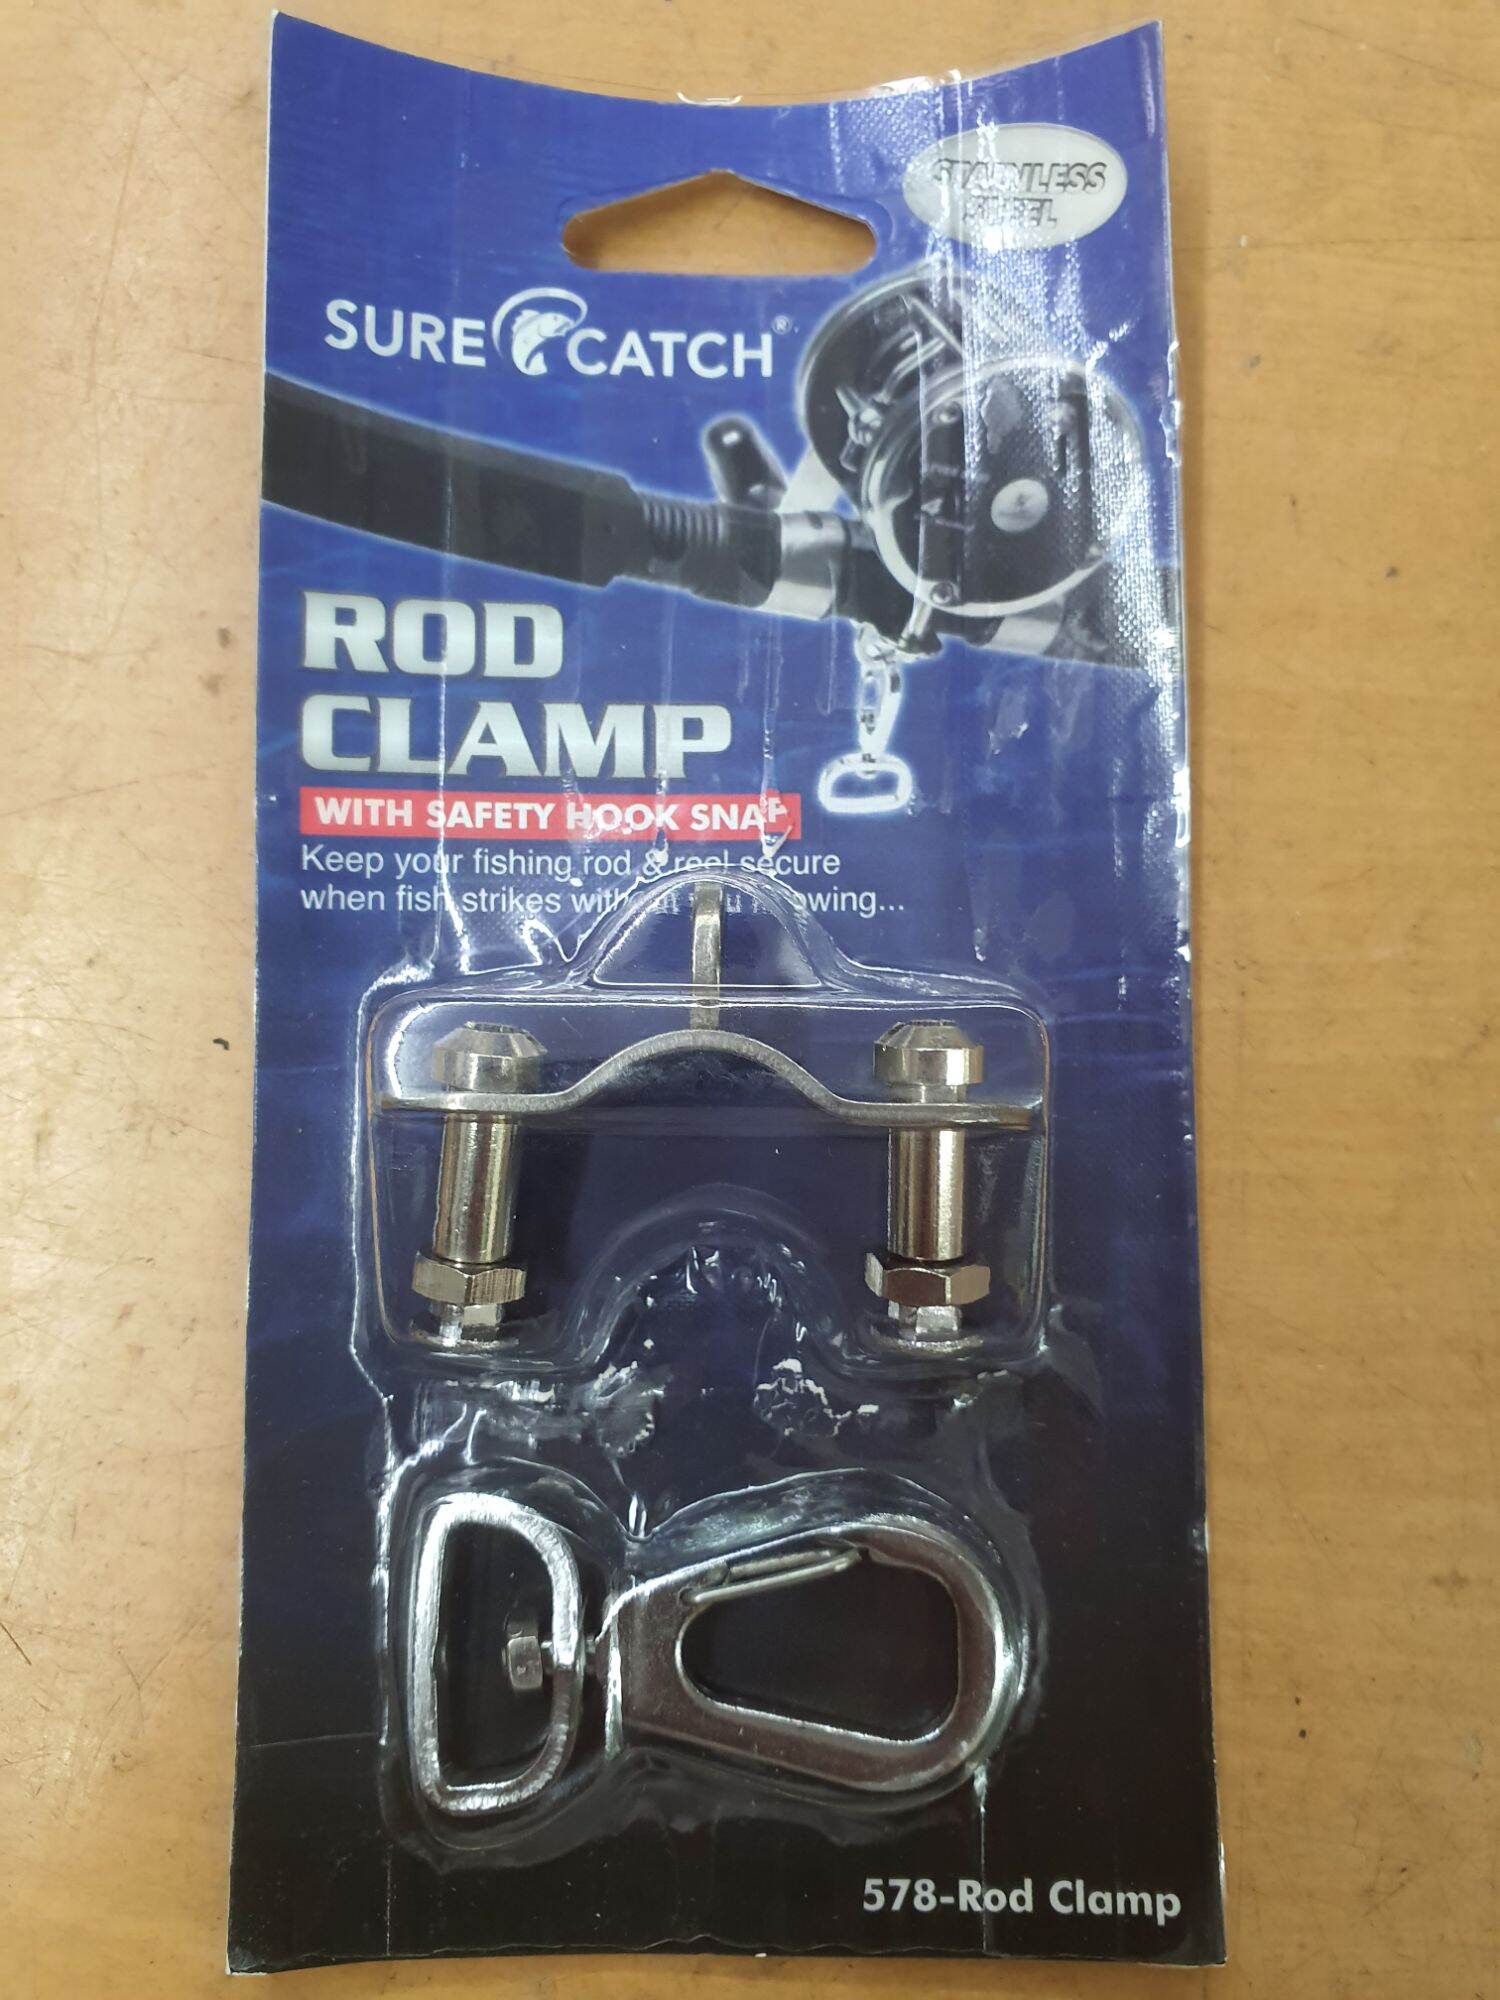 SURECATCH STAINLESS STEEL ROD CLAMP